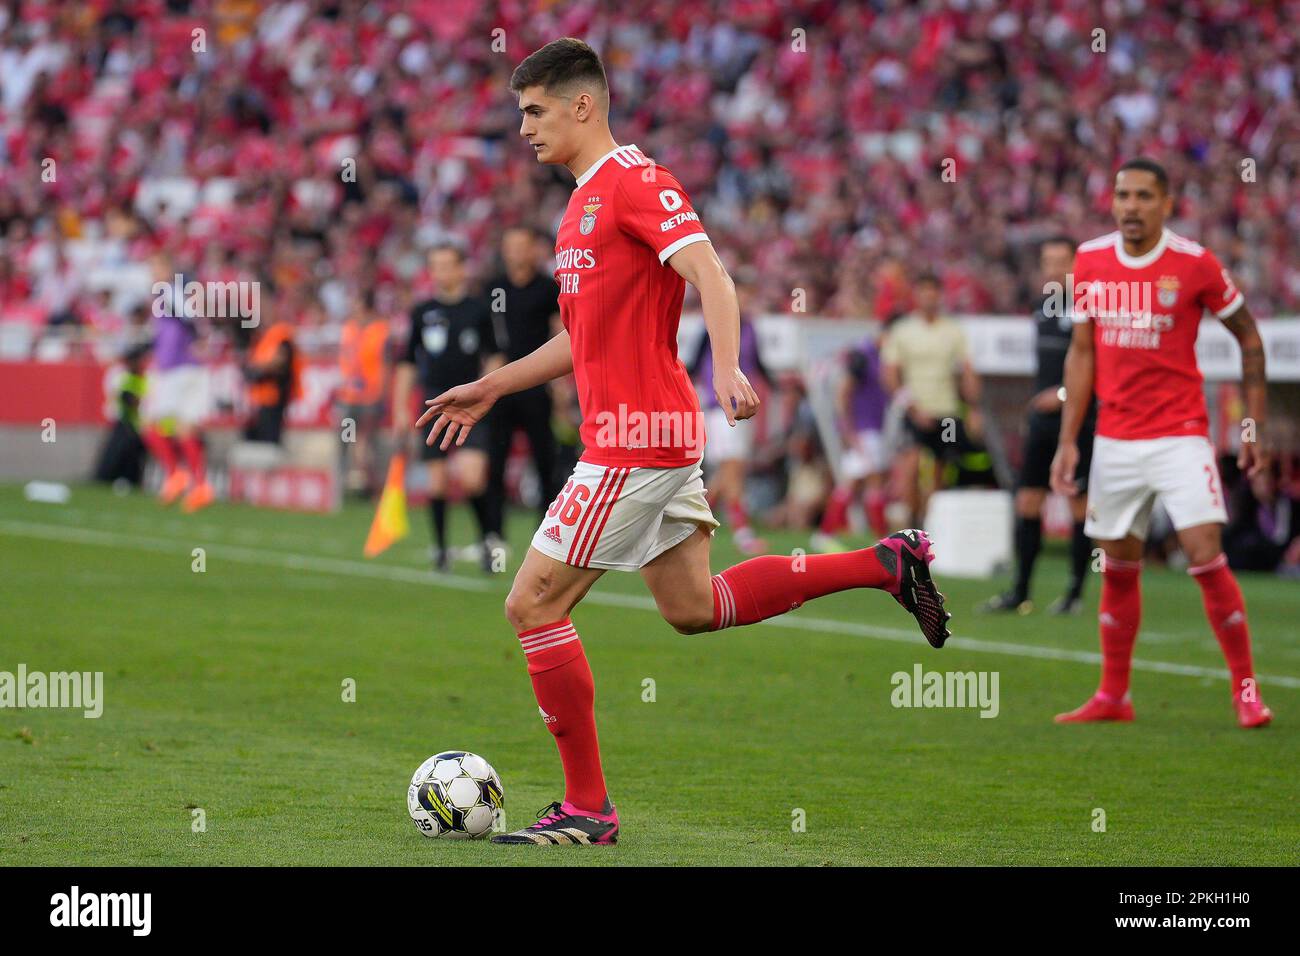 Lisbon, Portugal. 07th Apr, 2023. Antonio Silva from SL Benfica (C) and Gilberto from SL Benfica (R) in action during Liga Portugal Bwin football match between SL Benfica and FC Porto at Estadio da Luz.Final score: SL Benfica 1:2 FC Porto Credit: SOPA Images Limited/Alamy Live News Stock Photo